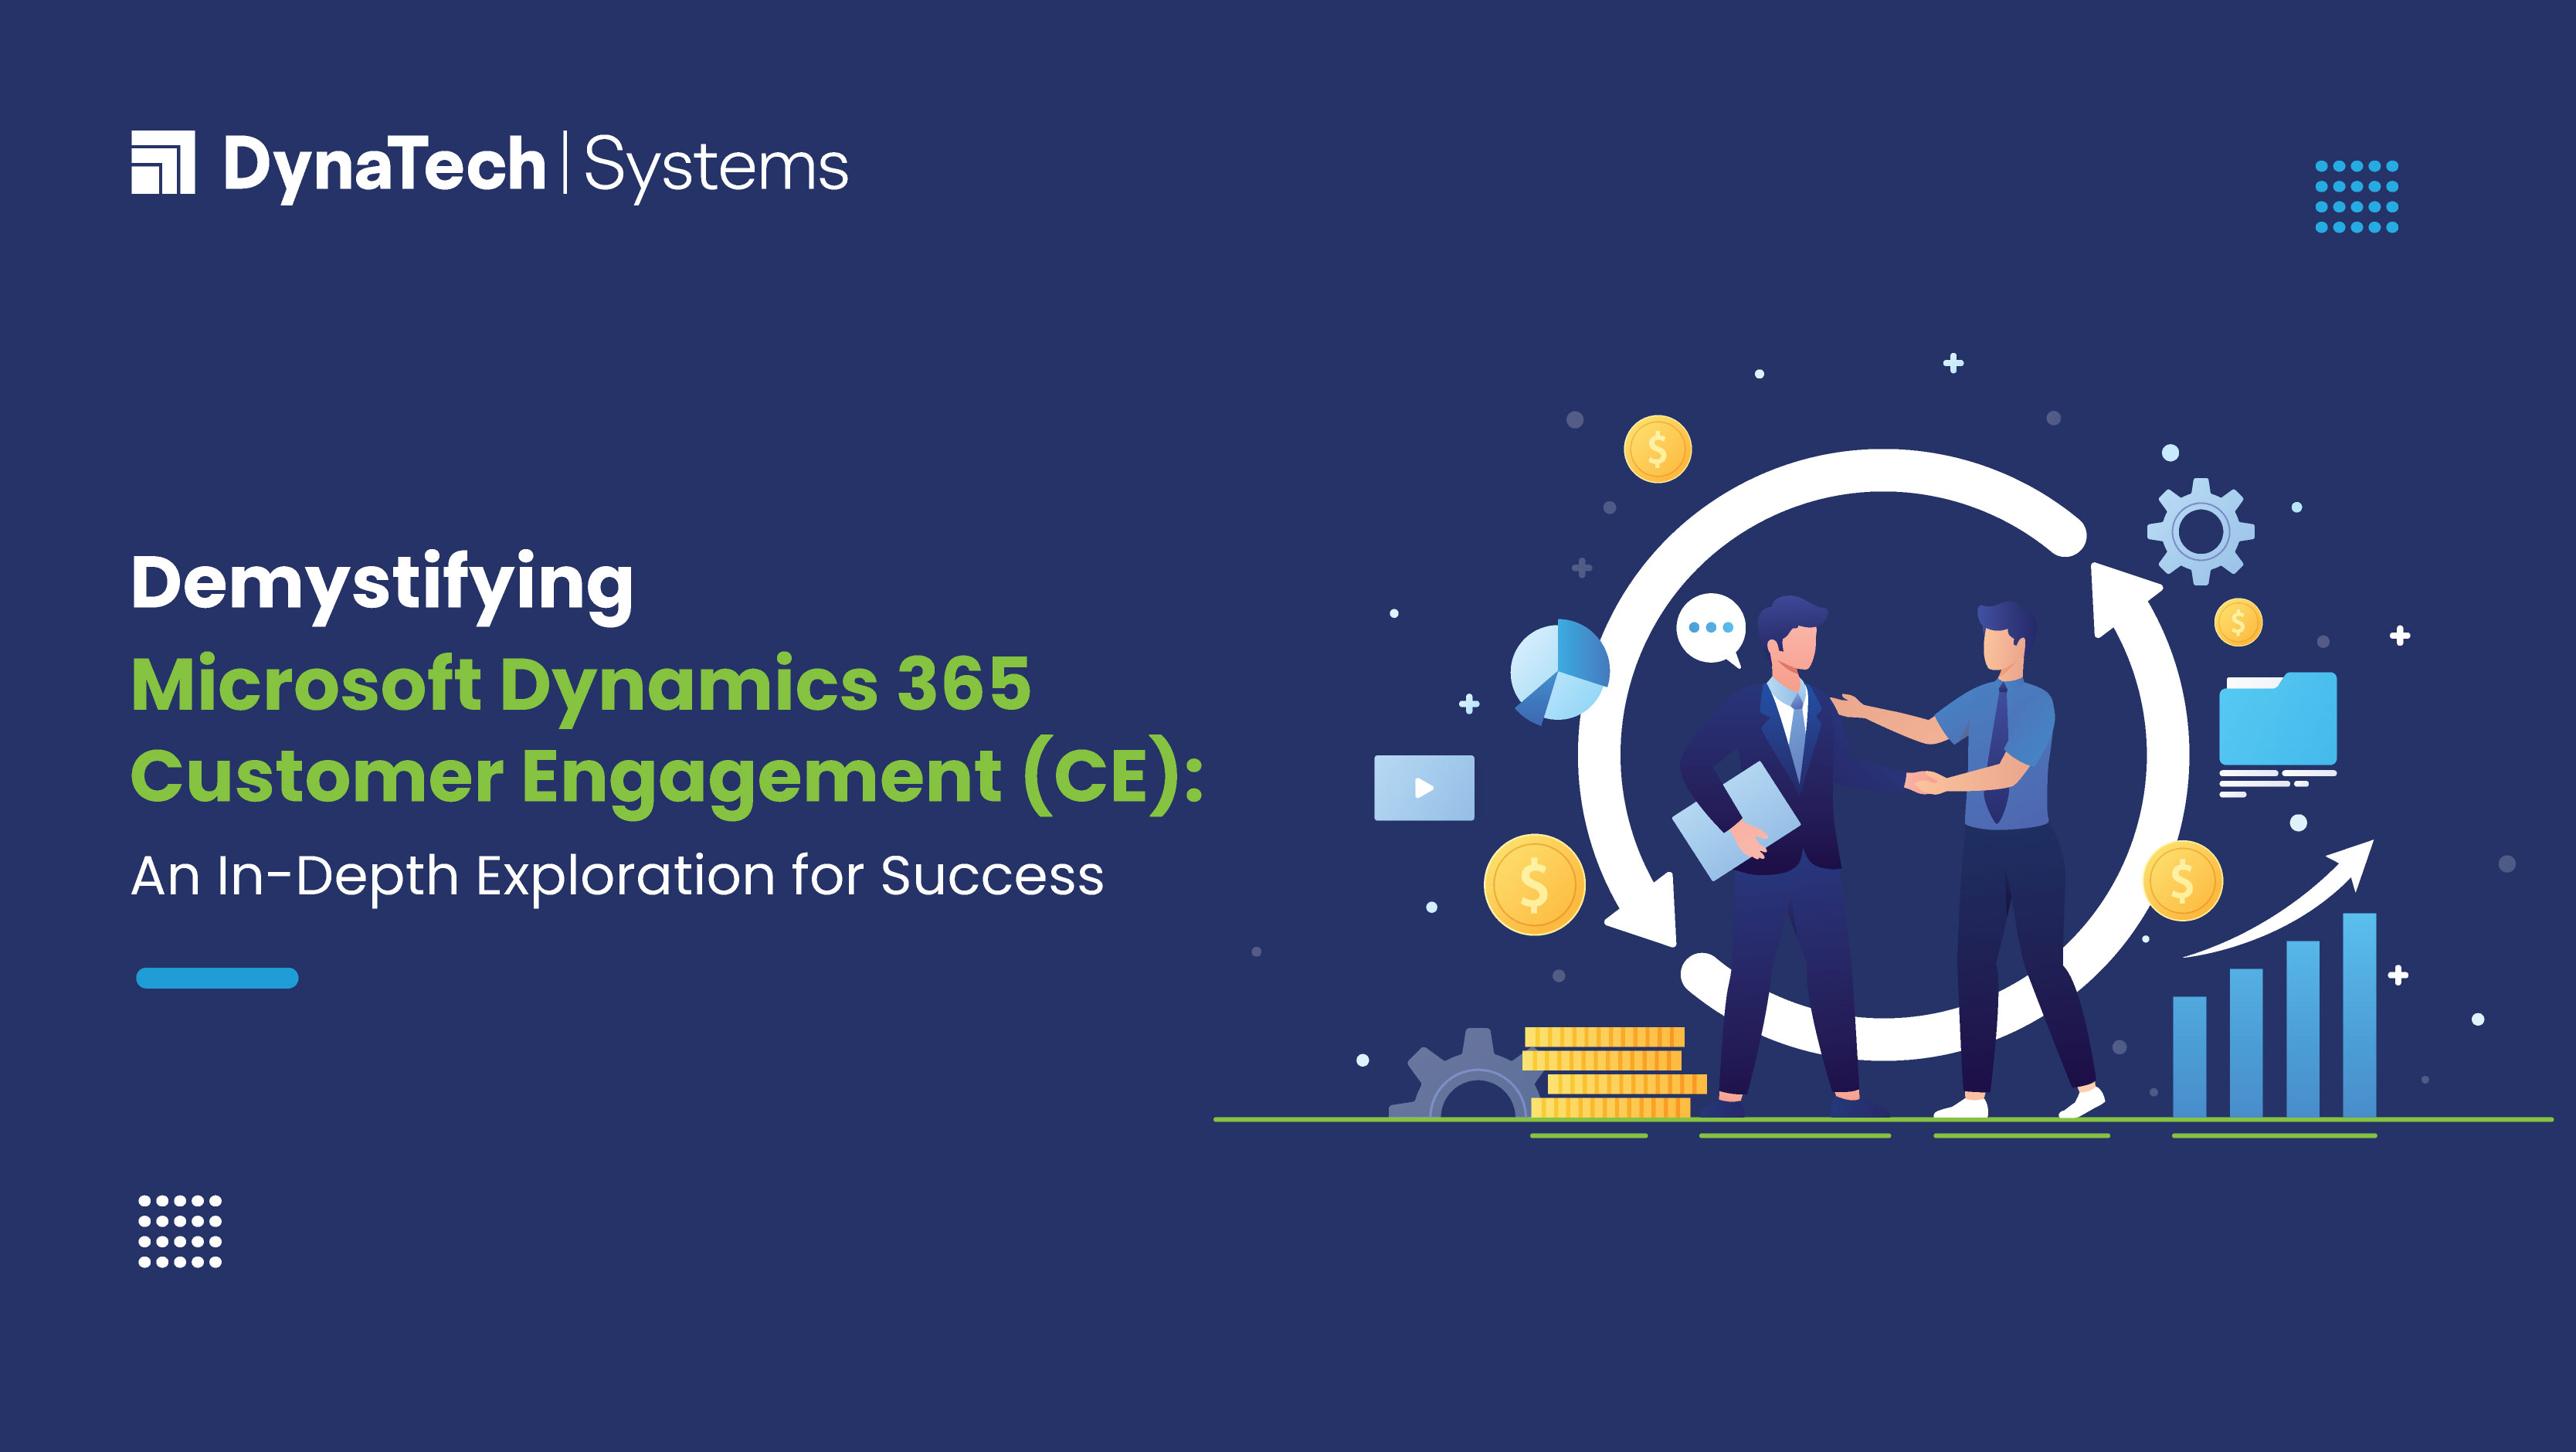 Demystifying Microsoft Dynamics 365 Customer Engagement (CE): An In-Depth Exploration for Success